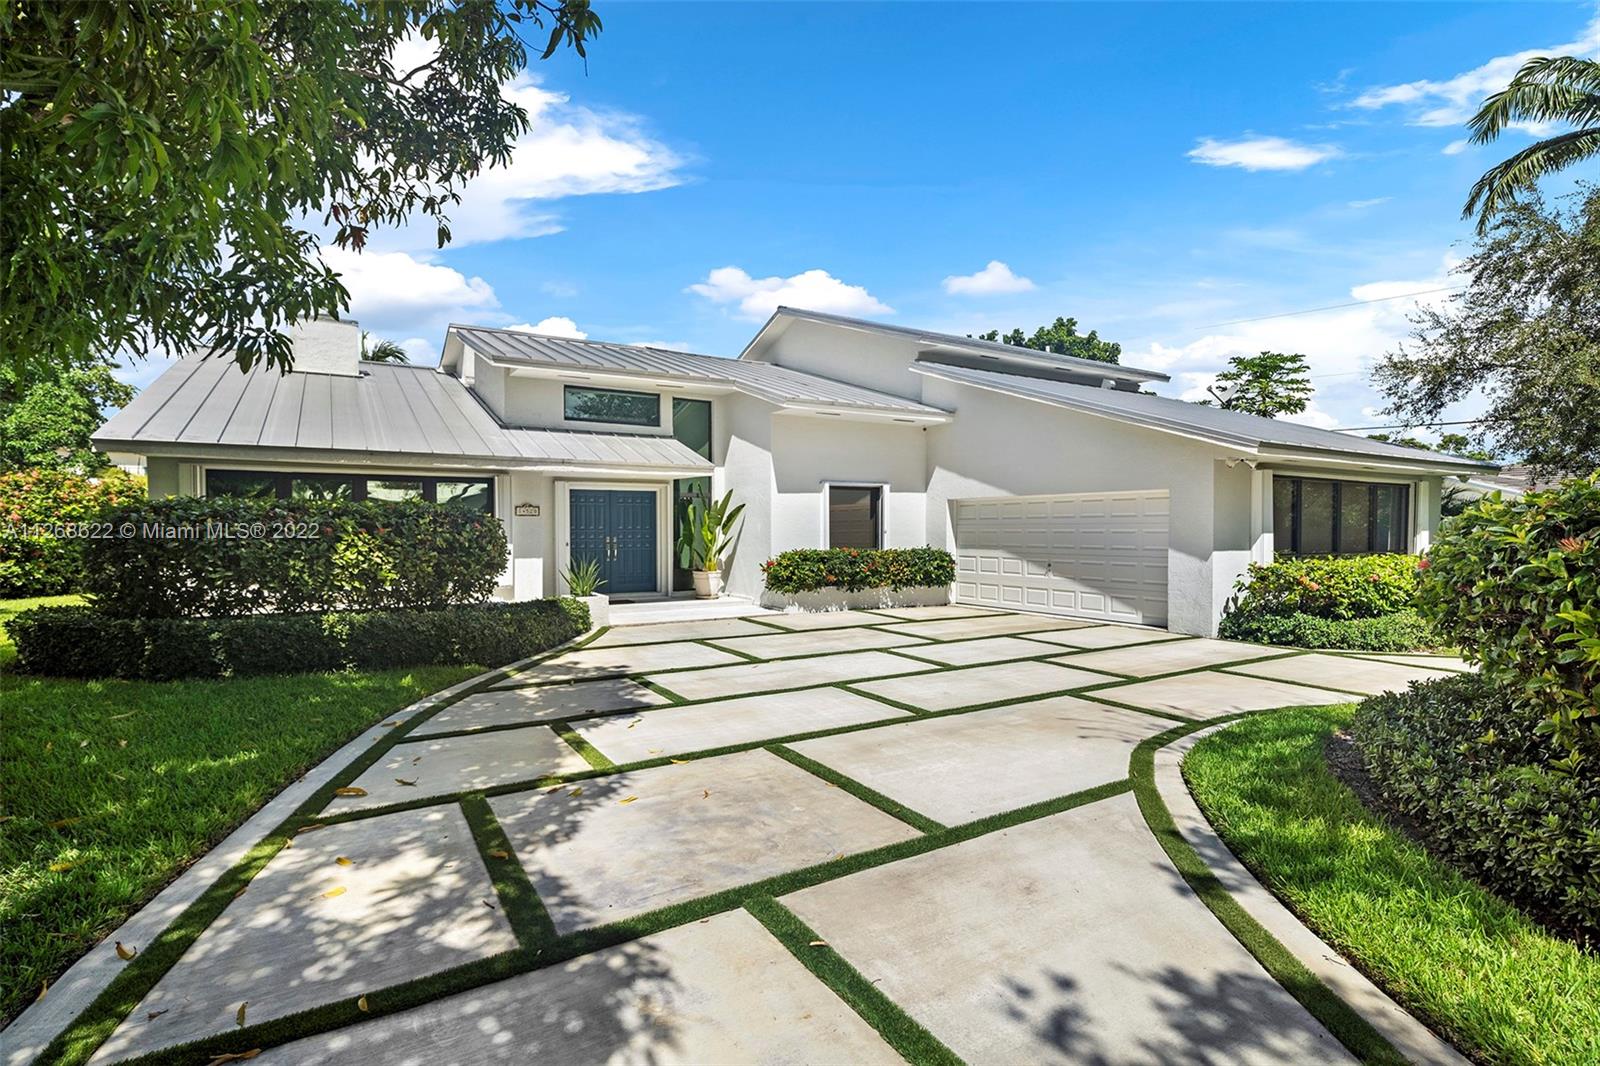 Rare opportunity to own an elegant, tastefully renovated property in the coveted guard gated Kings Bay community in S.Coral Gables. Upon entering this home one is greeted by a zen-like atrium garden that sets the mood for beauty and relaxation. The professionally designed interiors offer abundant natural light,volume high ceilings, formal living room w/ fireplace,2 dining rooms, family room,den and fabulous kitchen that opens to a covered terrace and a pristine saline pool. This exceptional home sits on a generous 15,800 SF lot with exotic tropical trees. The community offers a resident-only park and access to the Deering Bay marina with communal boat slips. Close proximity to nationally ranked schools, fine shopping and dining. Enjoy the S.FL lifestyle at its finest in this turnkey home.